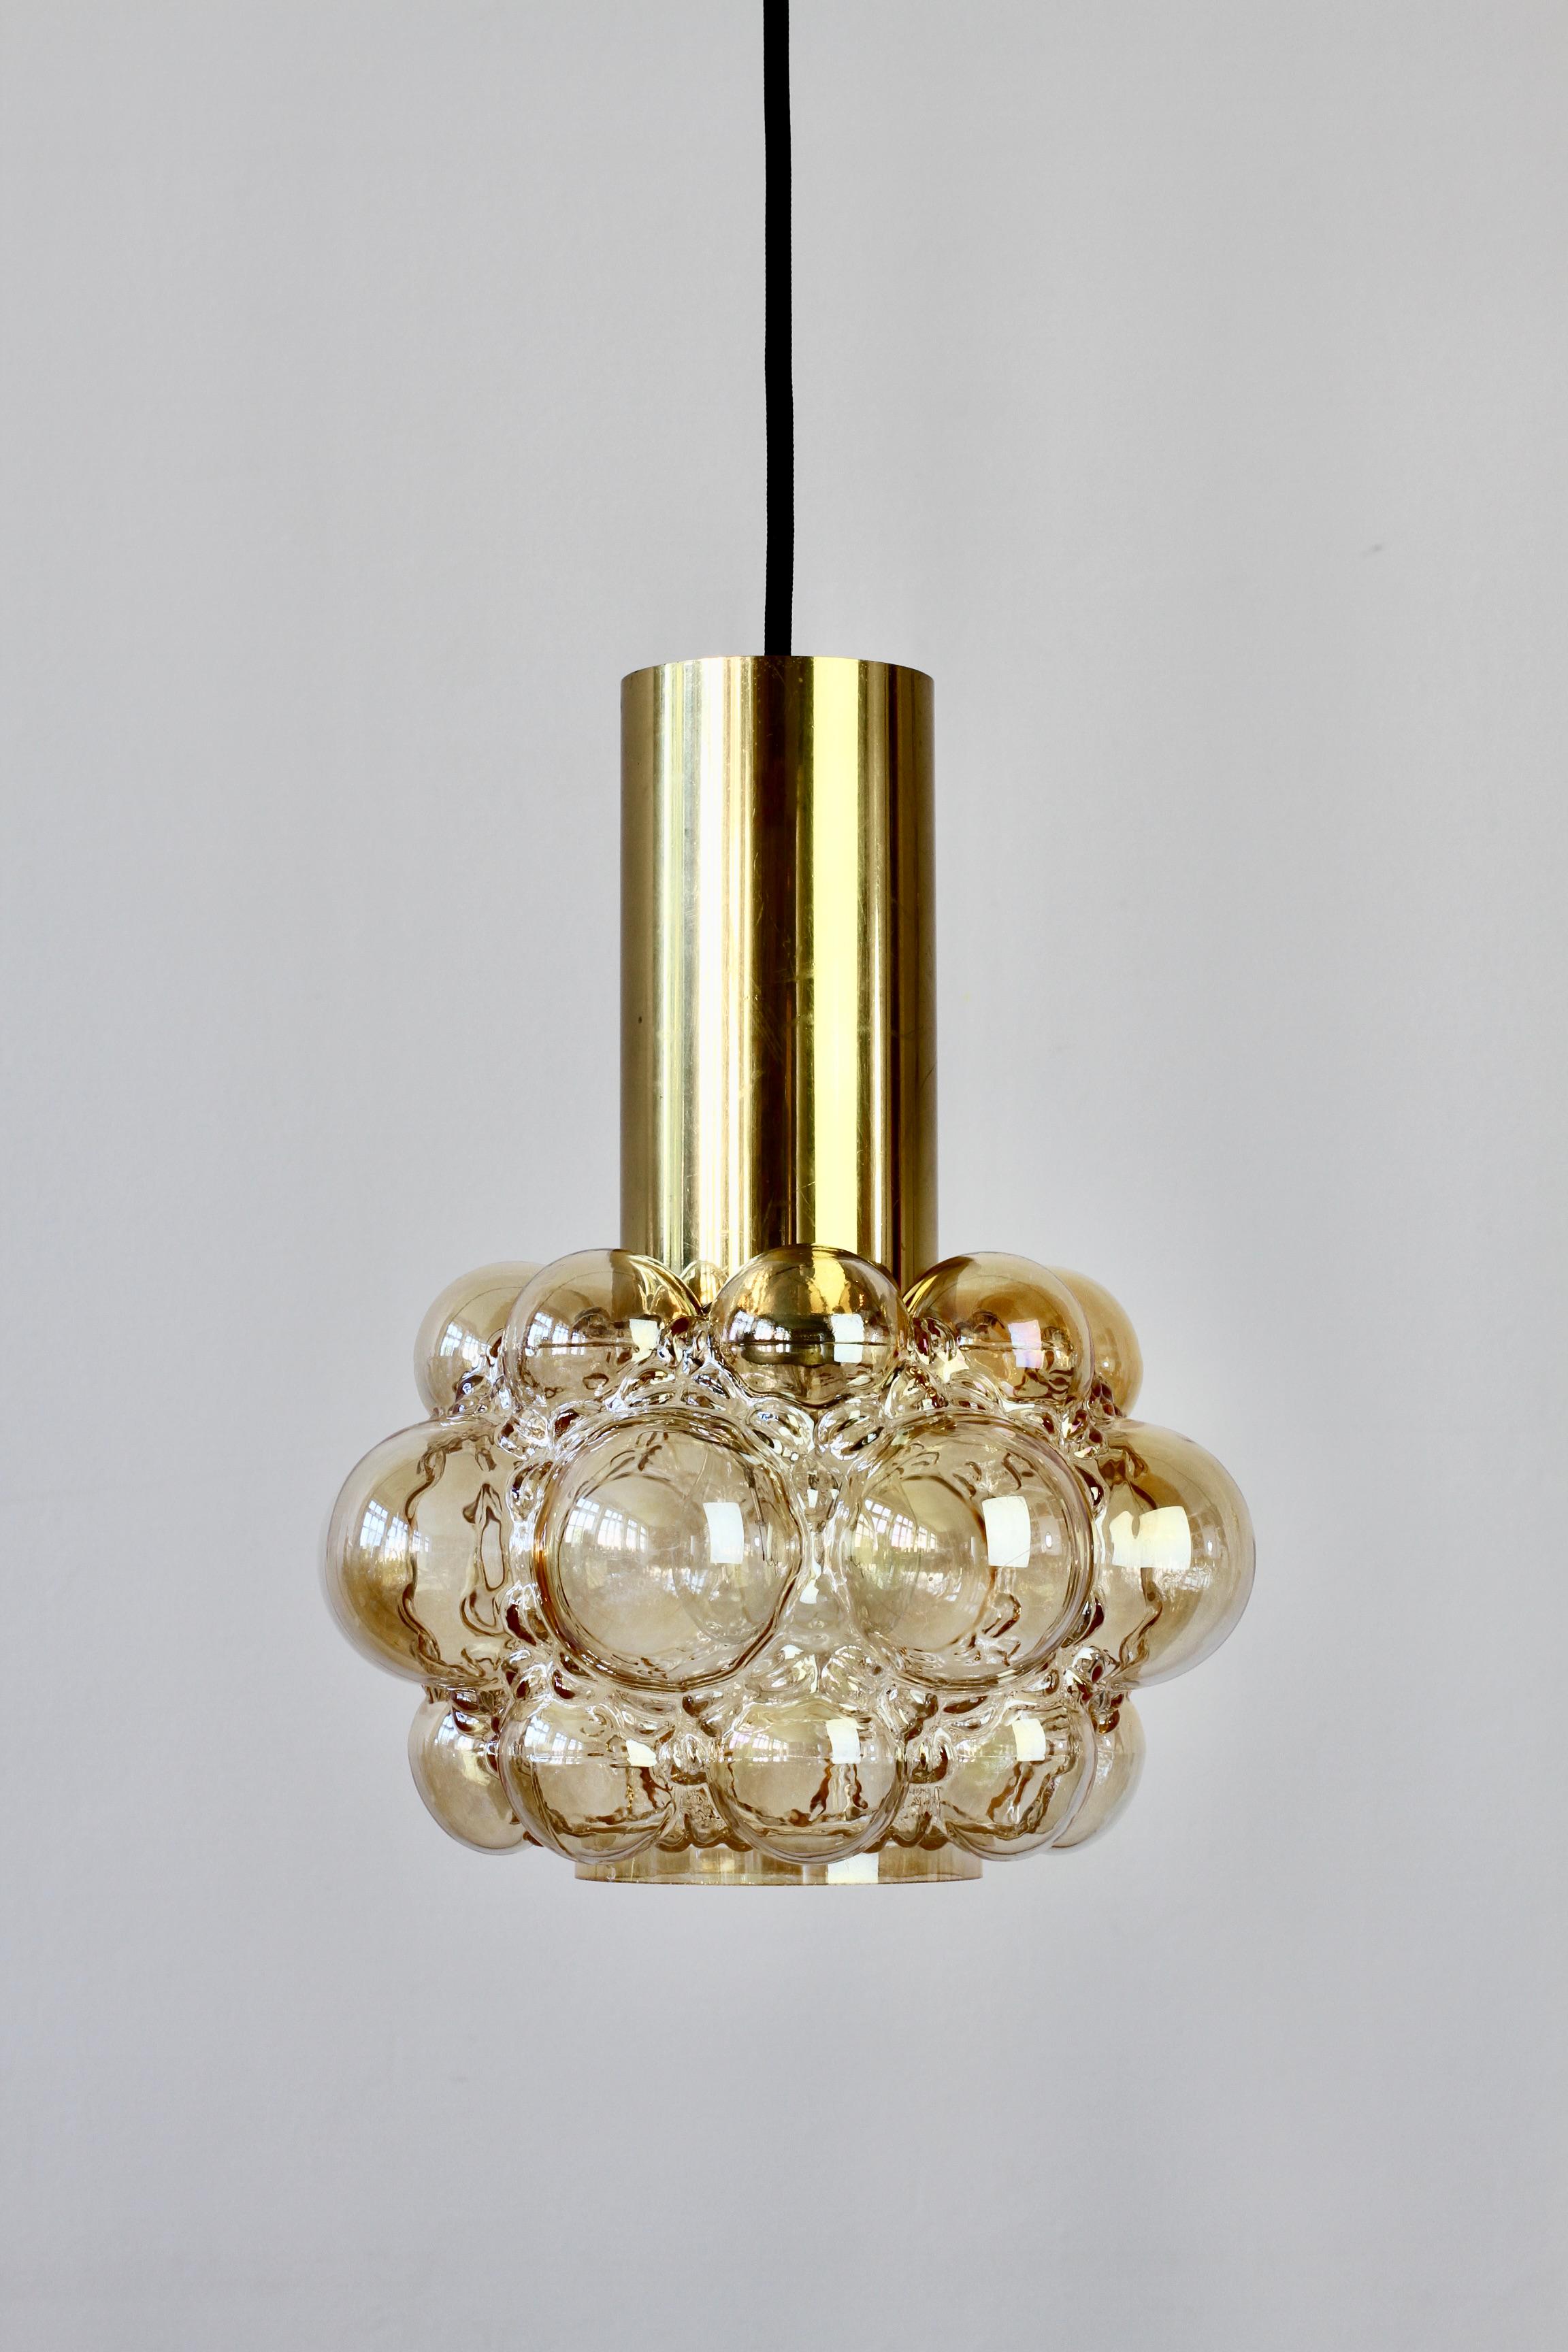 Late 1960s petite bubble glass ceiling pendant light designed by Helena Tynell for Glashütte Limburg. The light features a beautiful lampshade made from amber or champagne colored / coloured glass with a polished brass cylinder on top.

This,